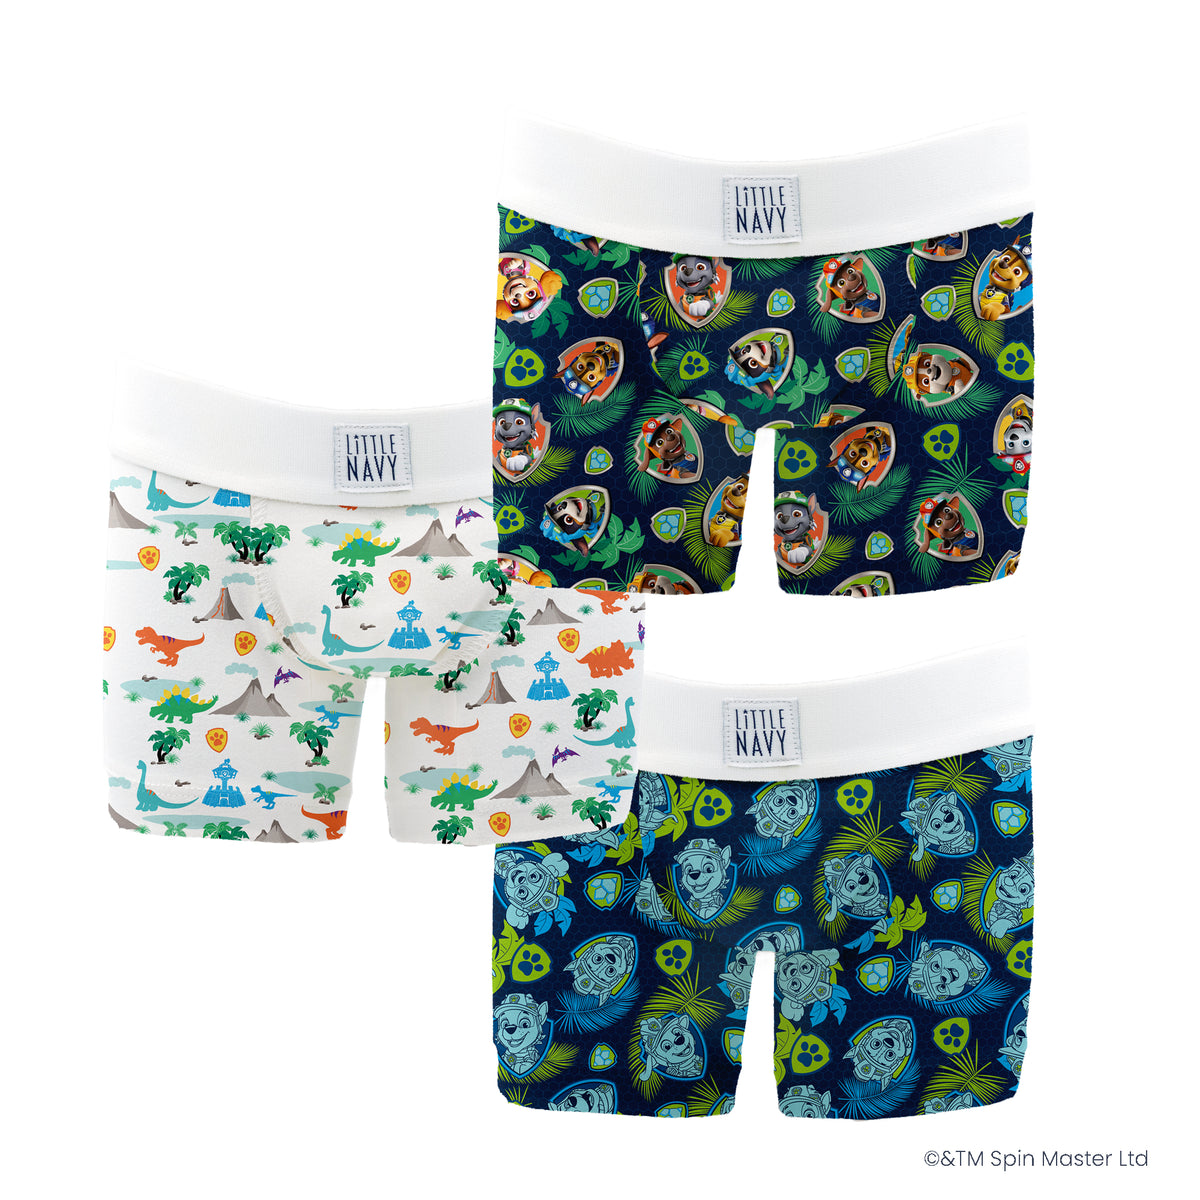 Nickelodeon Paw Patrol Action Underwear 3 Pack Boxer Briefs Size 4 X-Small  NWT